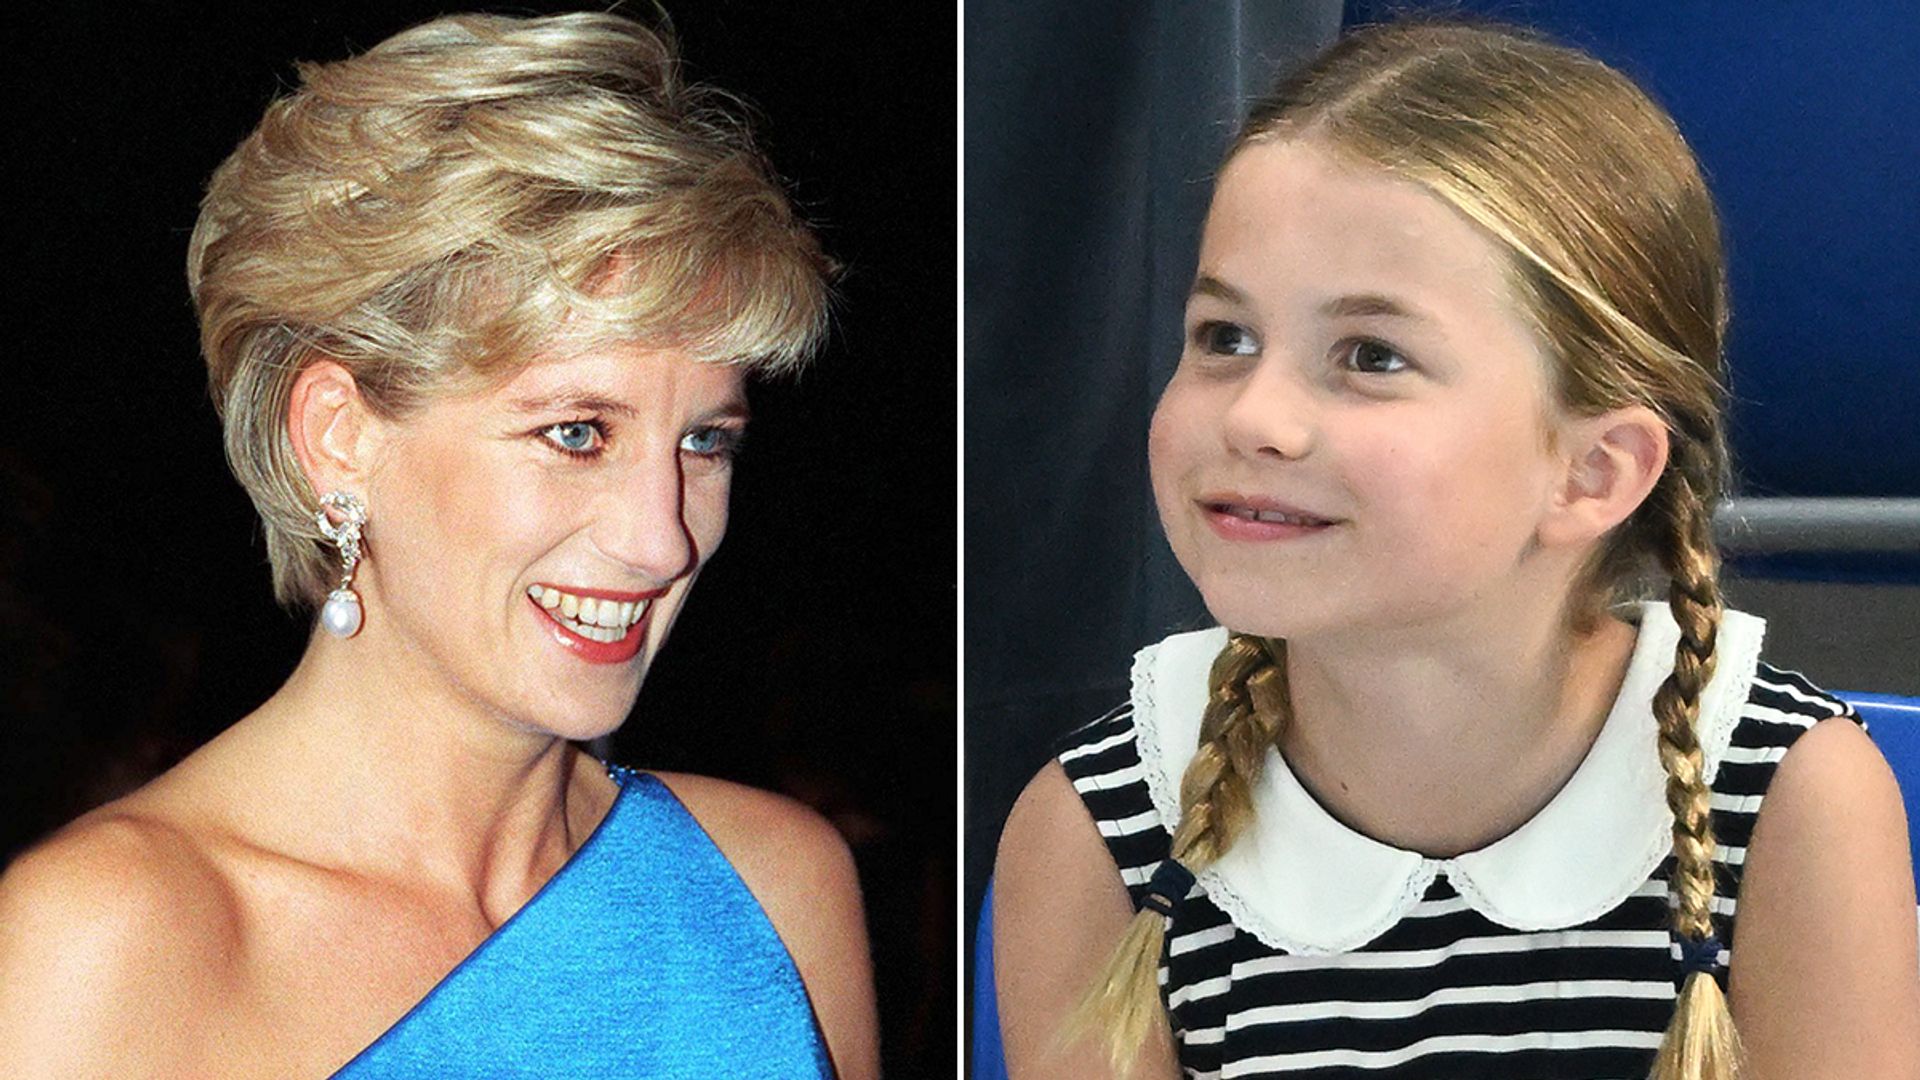 The late Princess Diana and her granddaughter Princess Charlotte smile